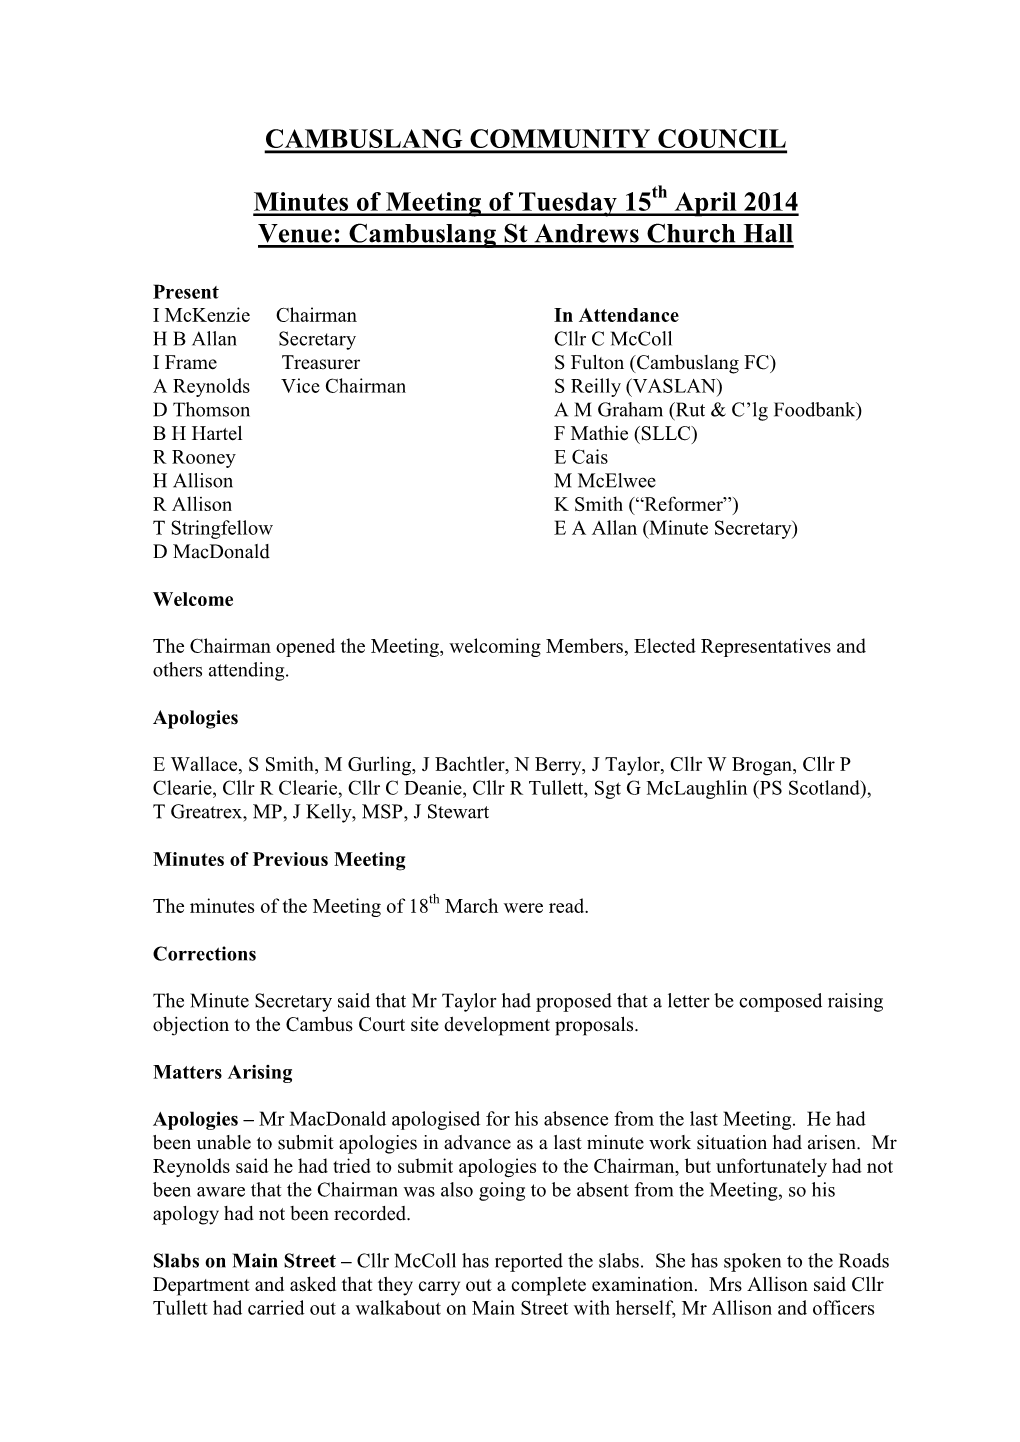 Minutes of Meeting of Tuesday 15Th April 2014 Venue: Cambuslang St Andrews Church Hall